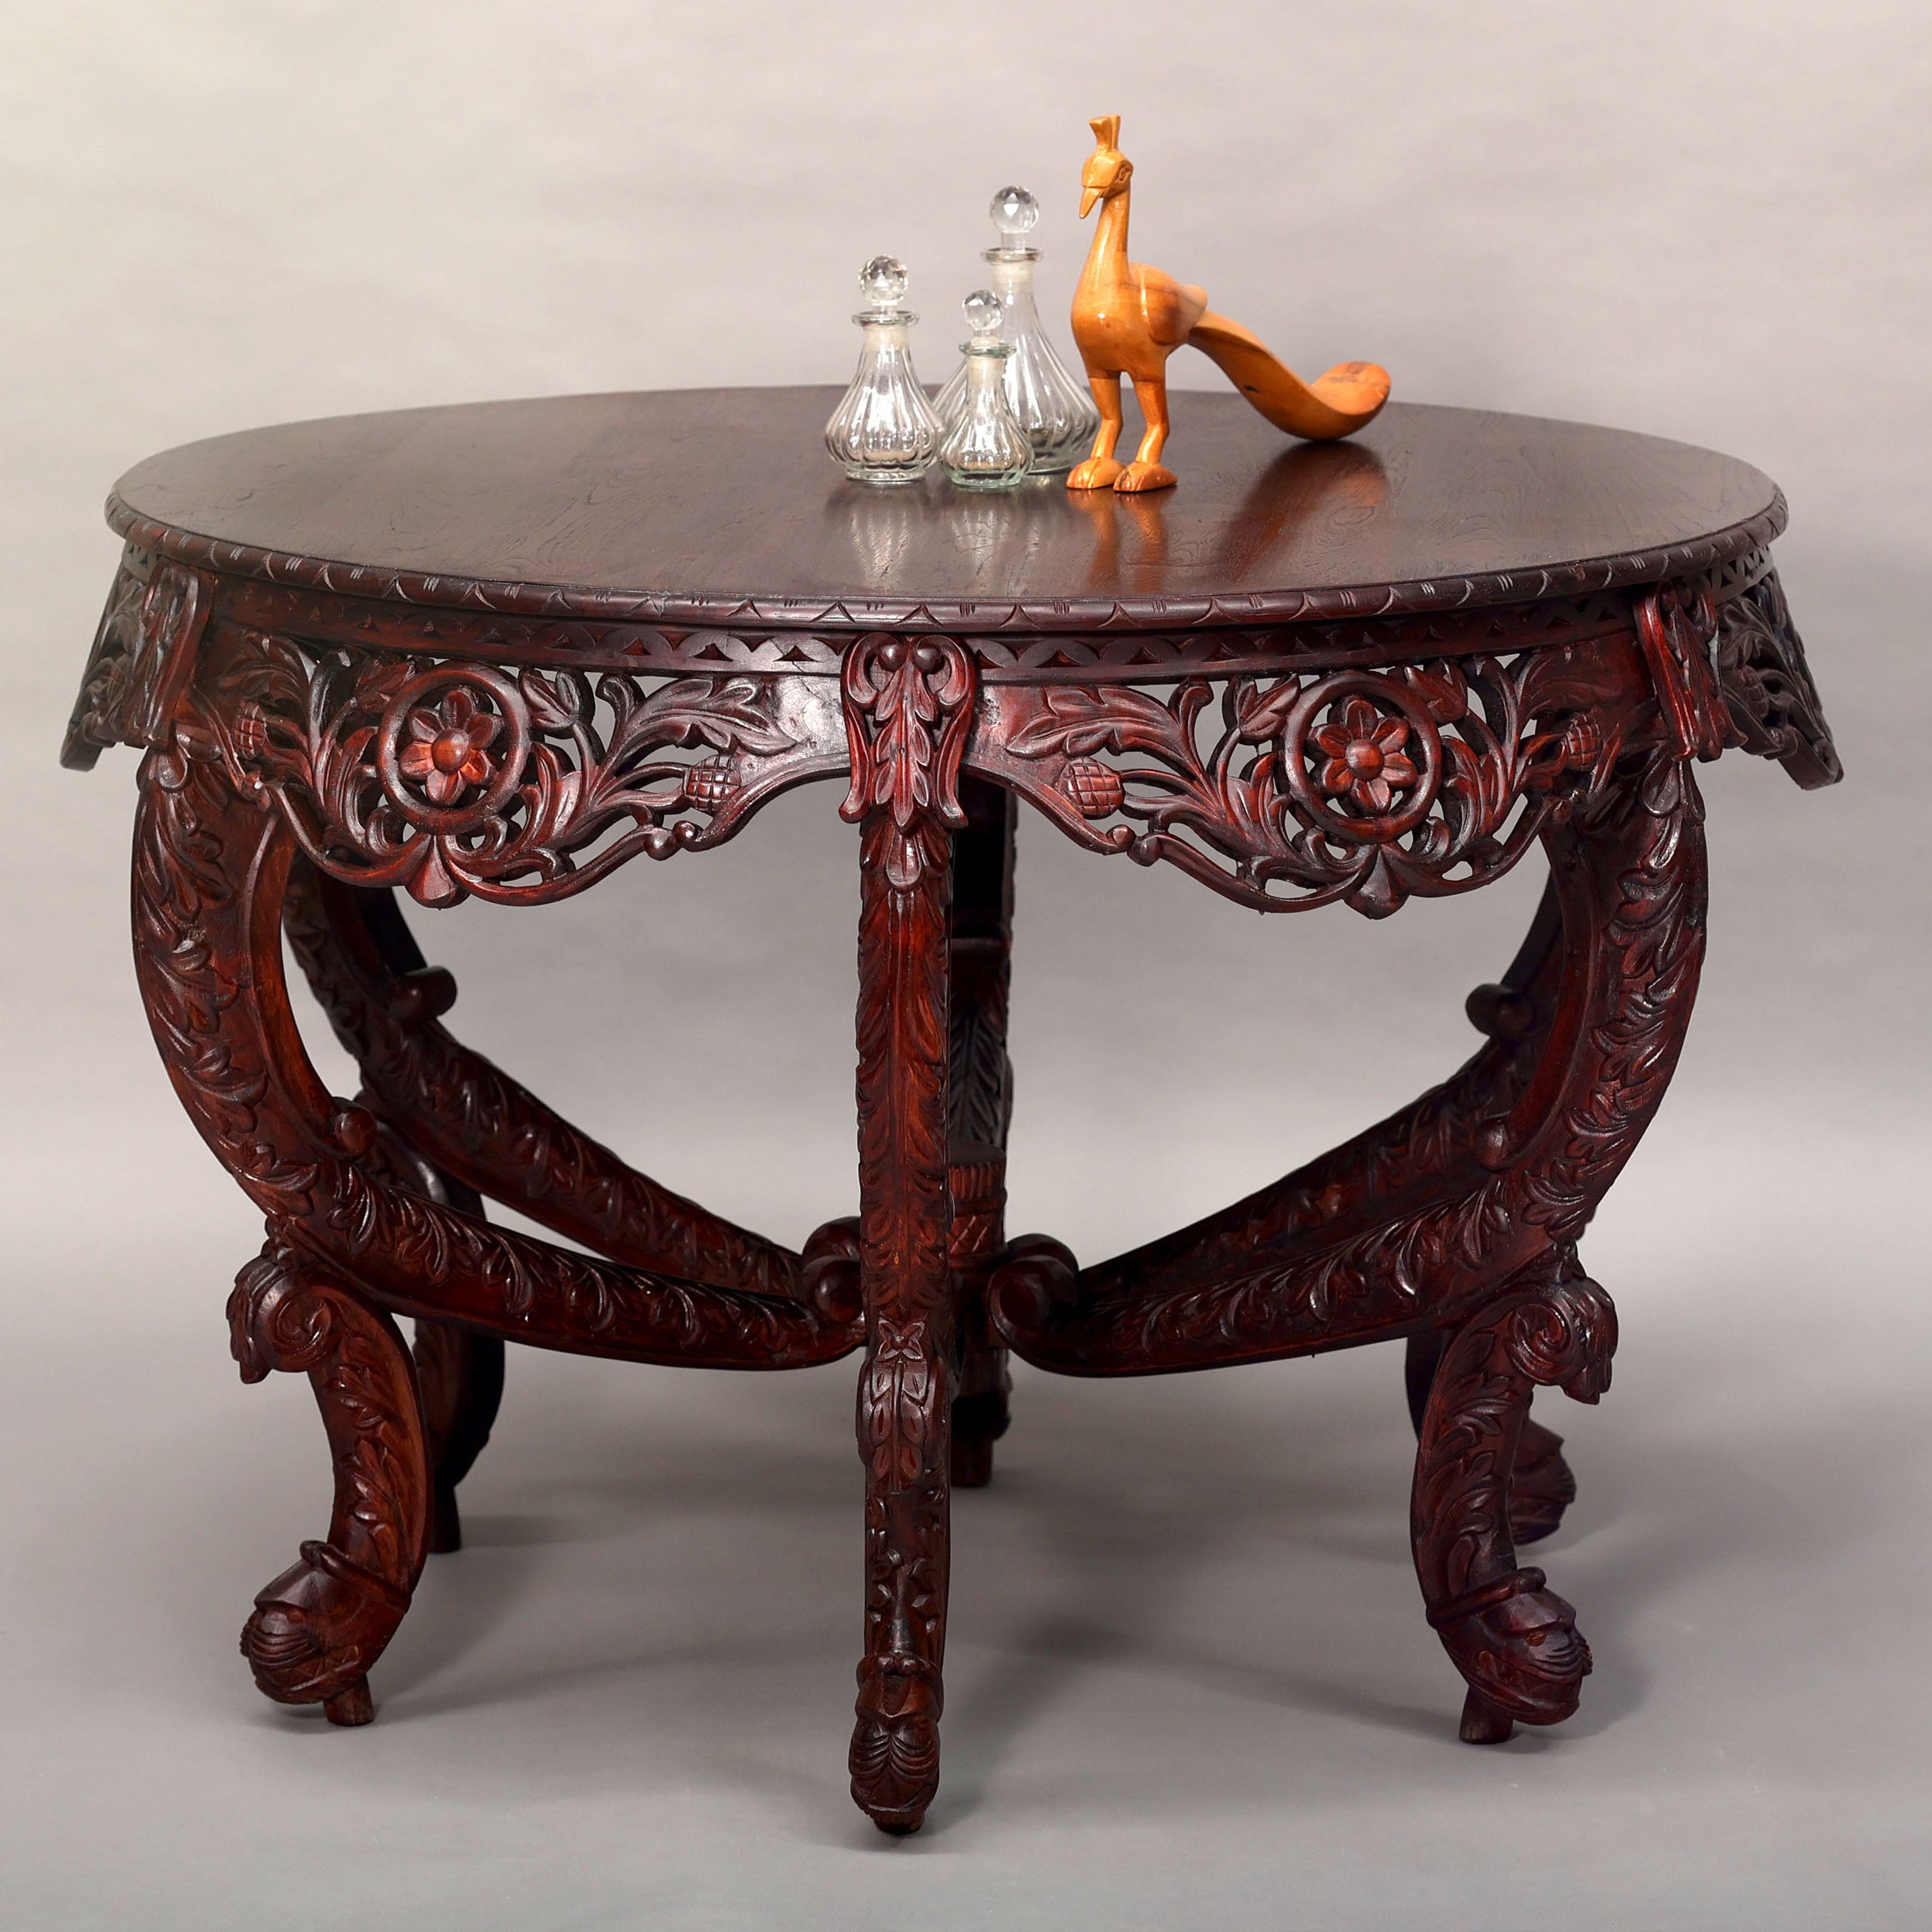 Royal inquisitive Carved Teak Round Table Console Table